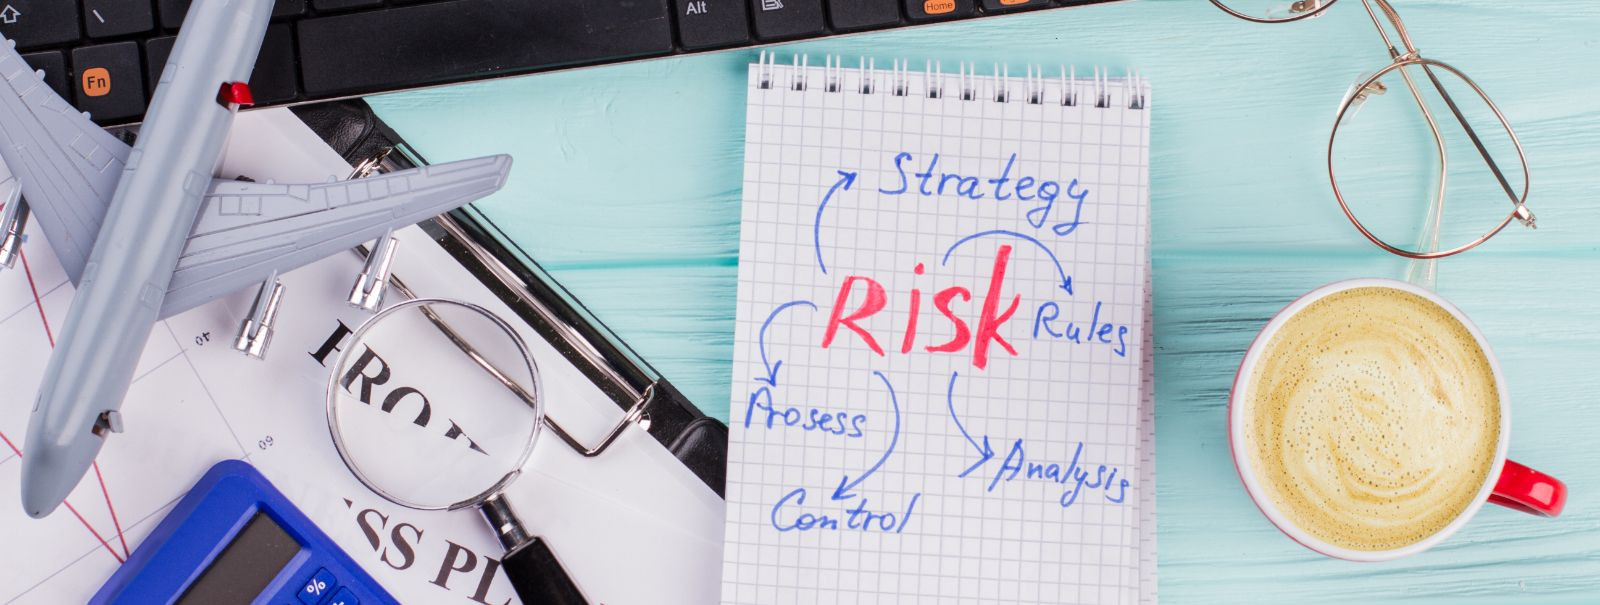 Risk management is a systematic process of identifying, analyzing, and responding to project risks. It involves the coordination of activities to direct and con